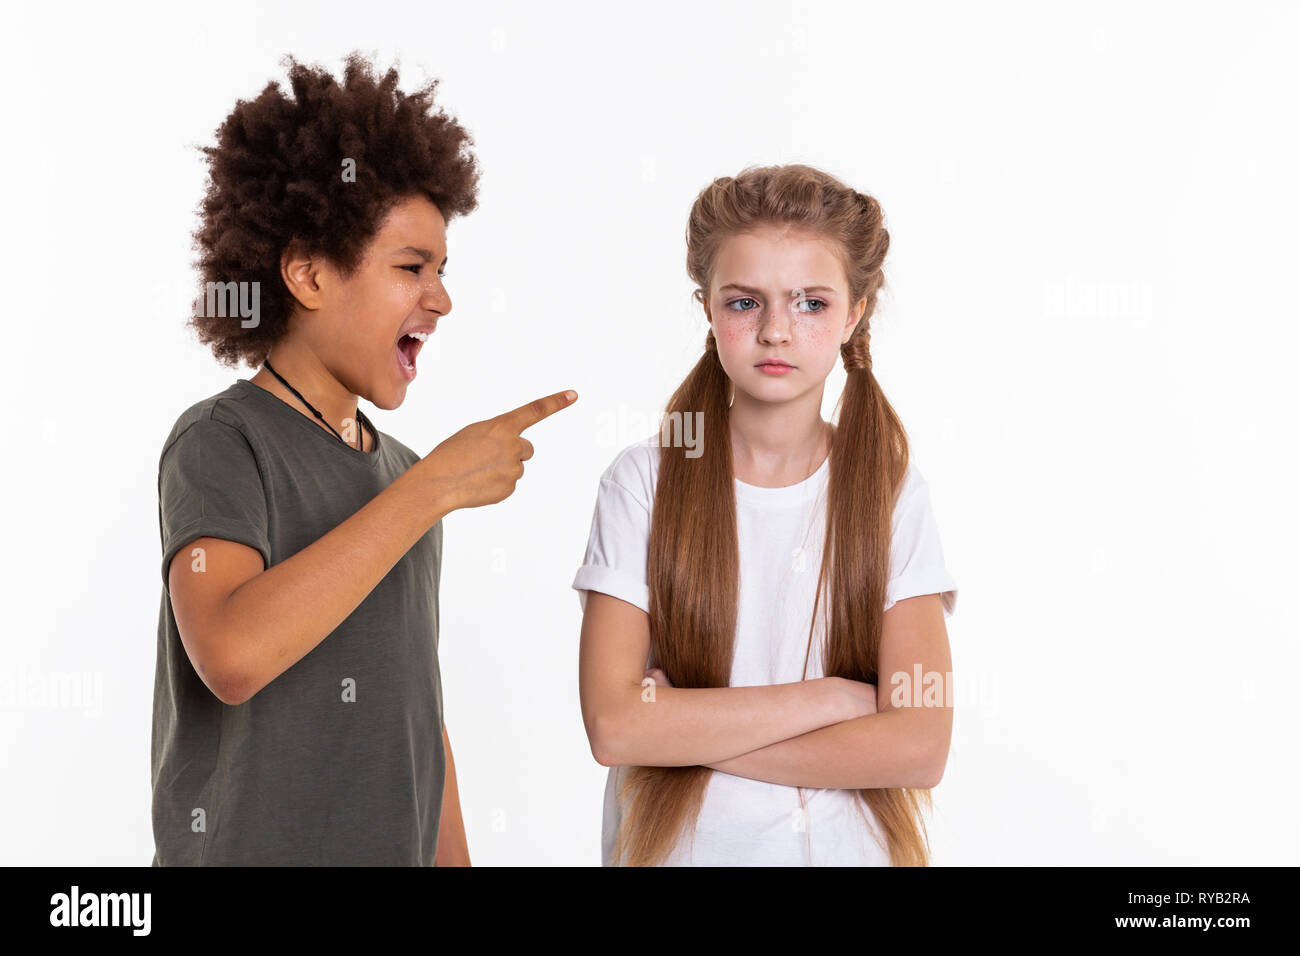 Angry long-haired girl resolutely crossing hands while boy pointing at her Stock Photo